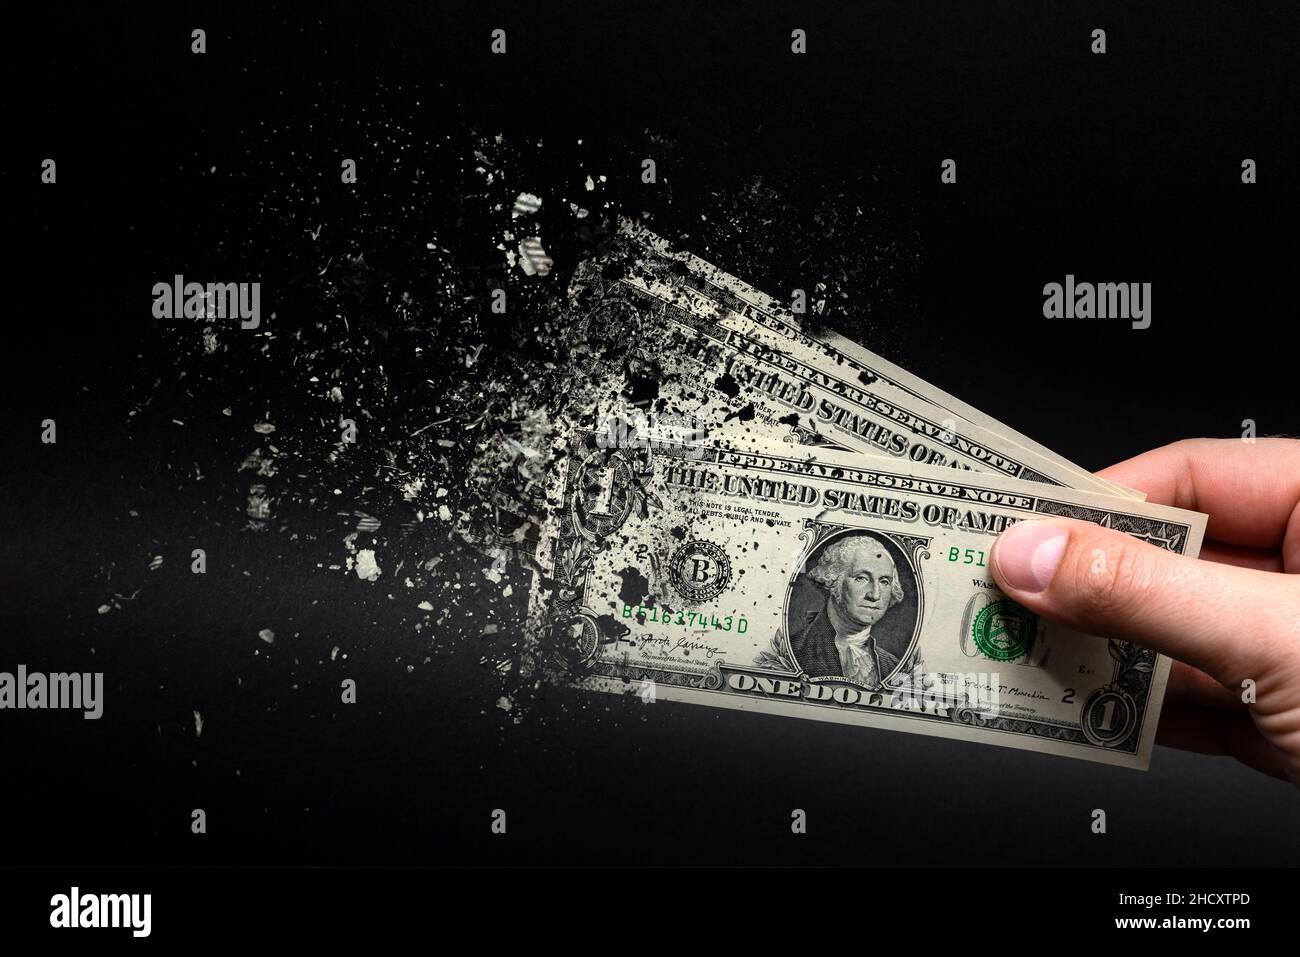 Inflation, dollar hyperinflation with black background. One dollar bill is sprayed in the hand of a man on a black background. The concept of decreasi Stock Photo